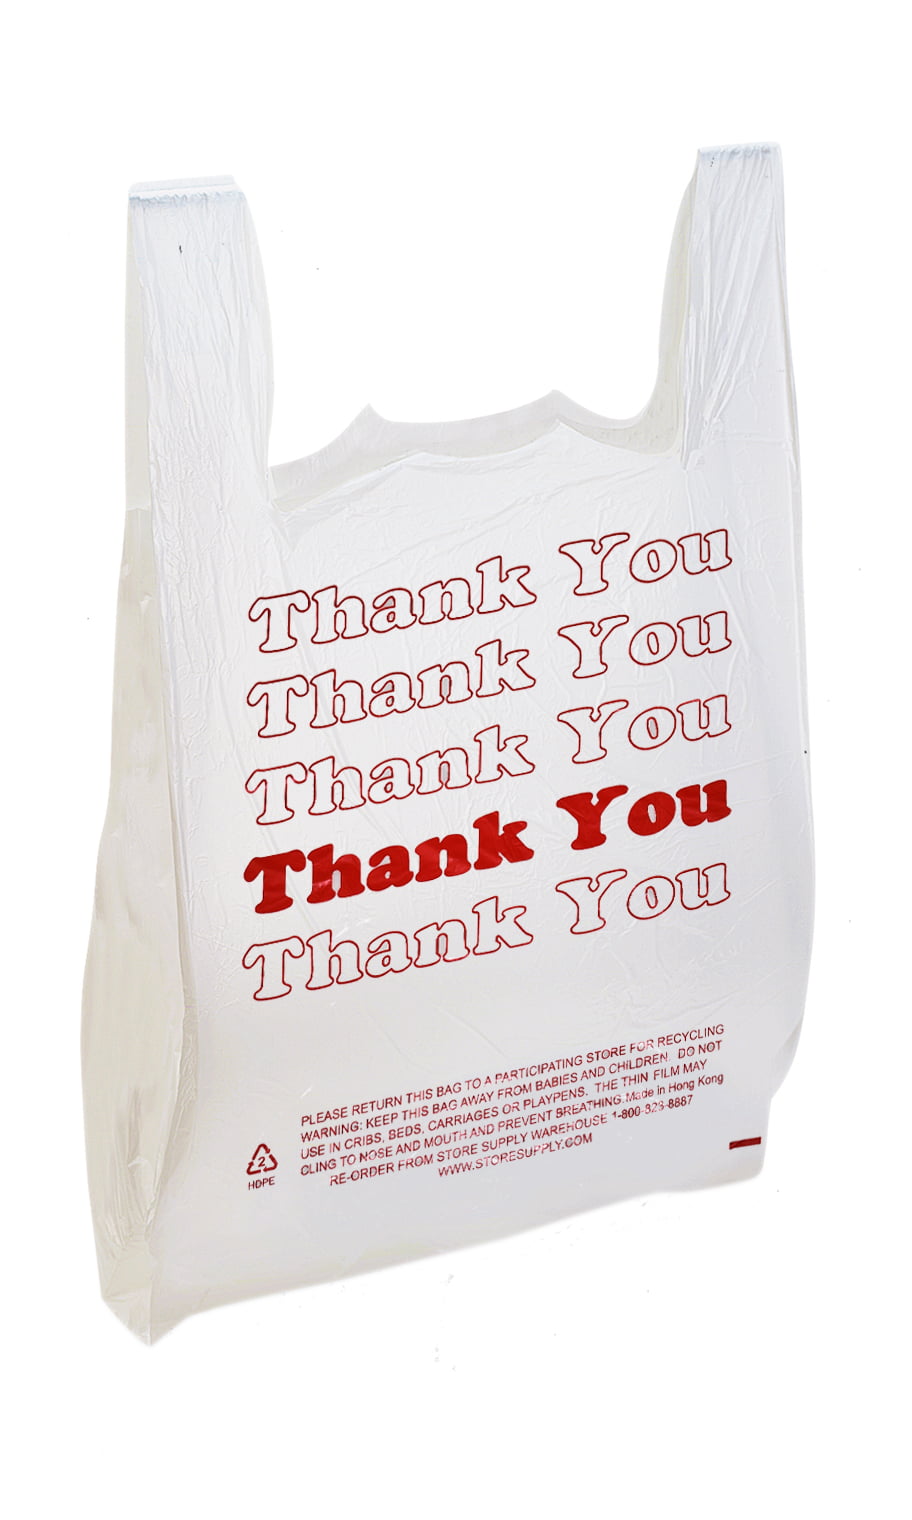 Height 22 Interplas MB-T-24TK Thank You Shopping Bags Width 11.5 0.55 Mil Case of 1000 HDPE